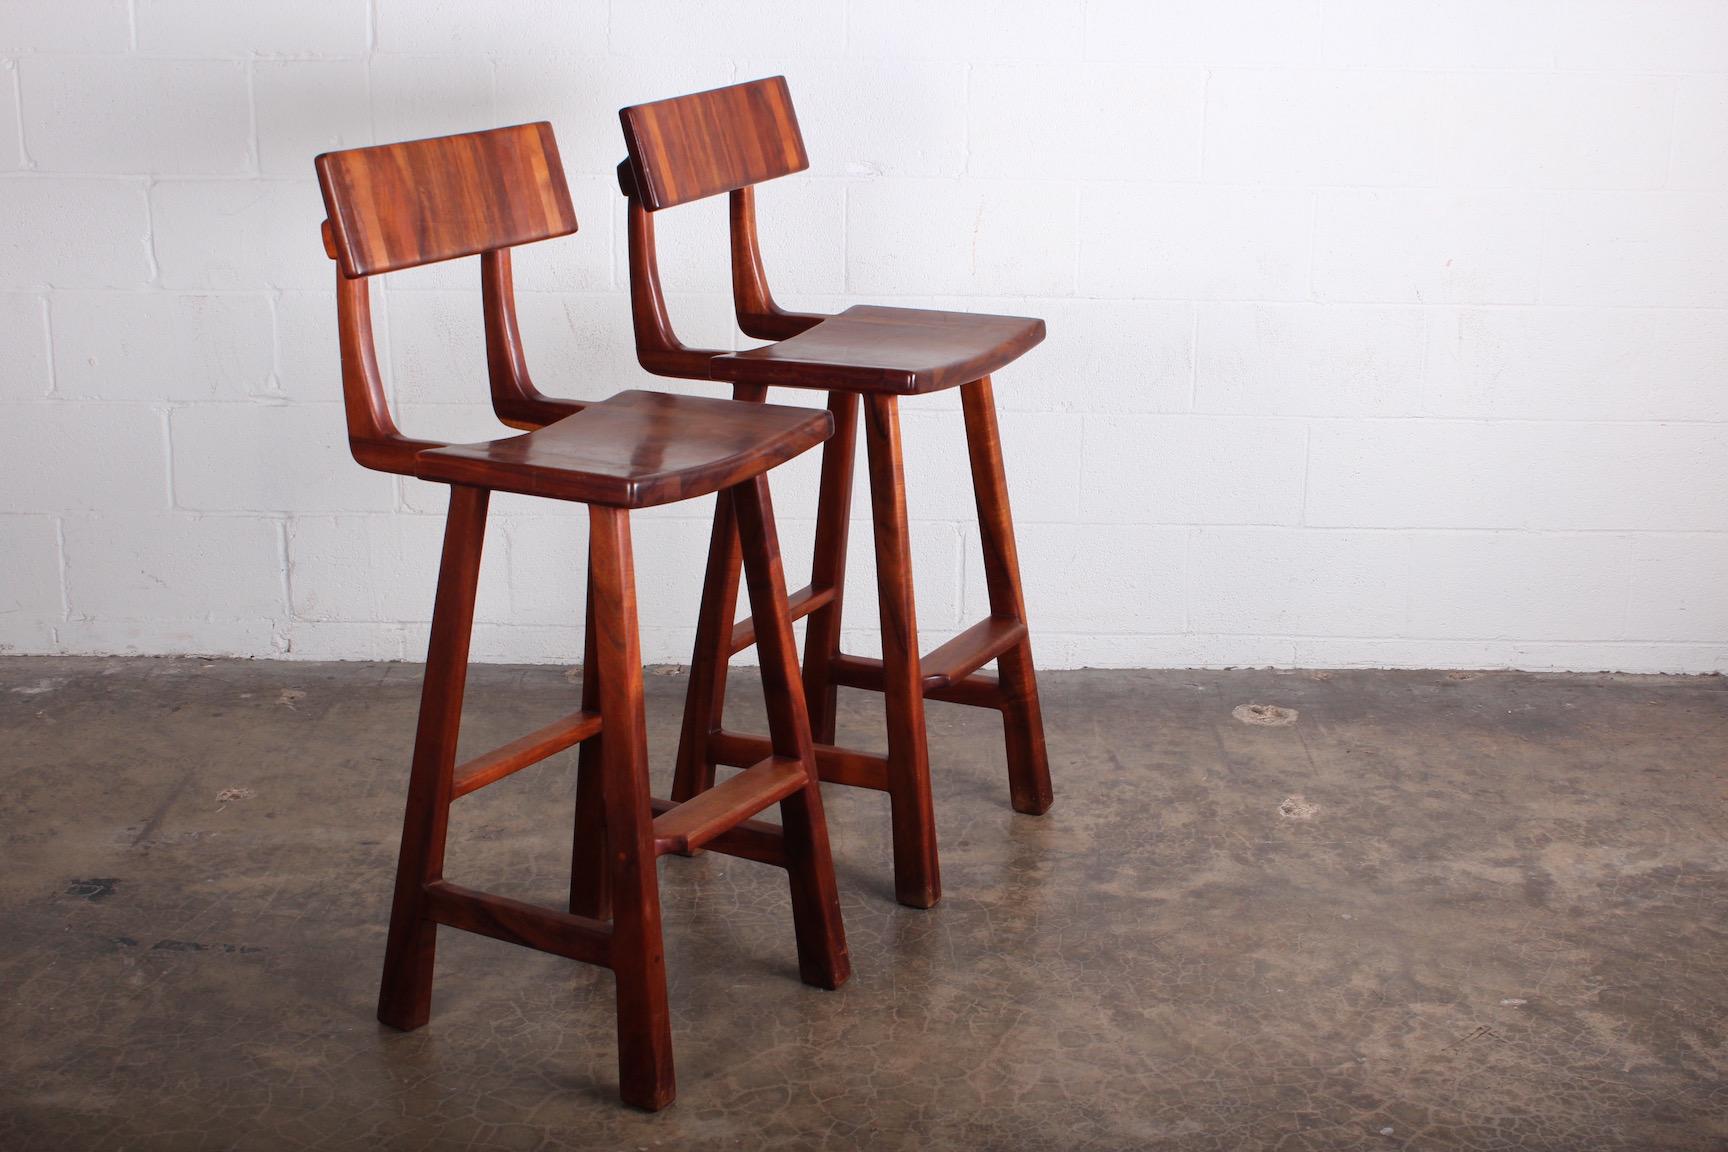 Pair of Studio Craft Barstools by Robert and Joanne Herzog For Sale 5